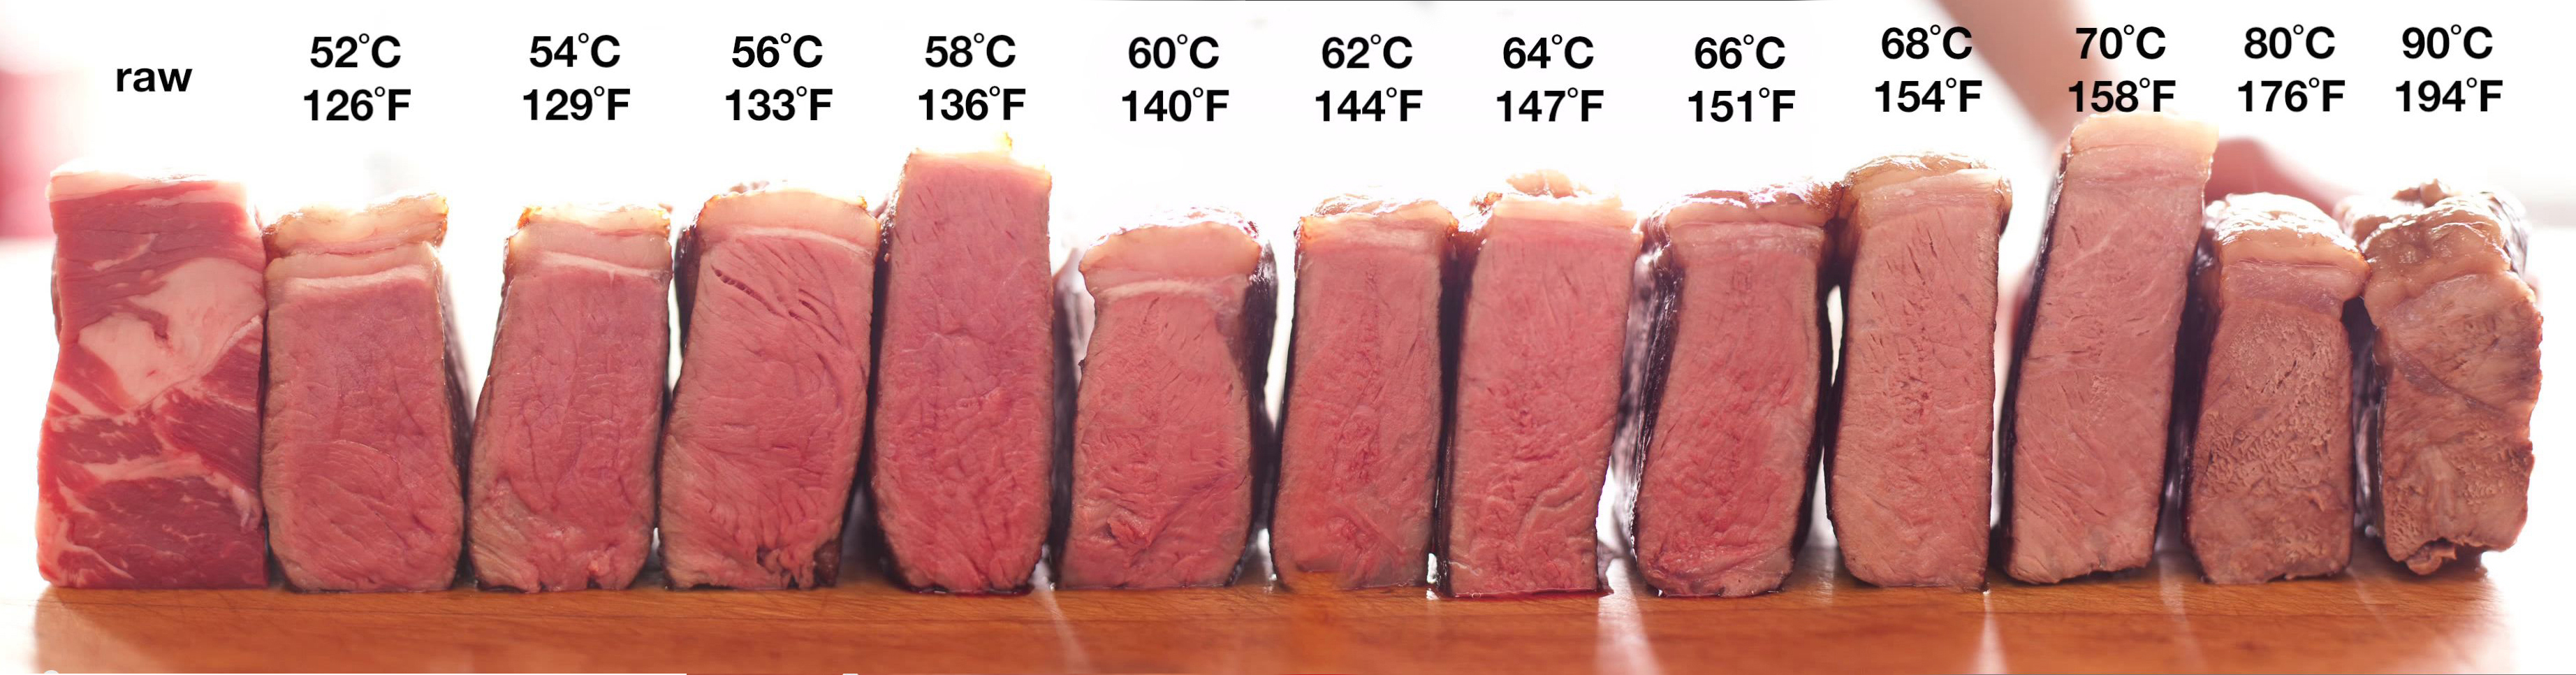 Sous Vide Cooking and Chart